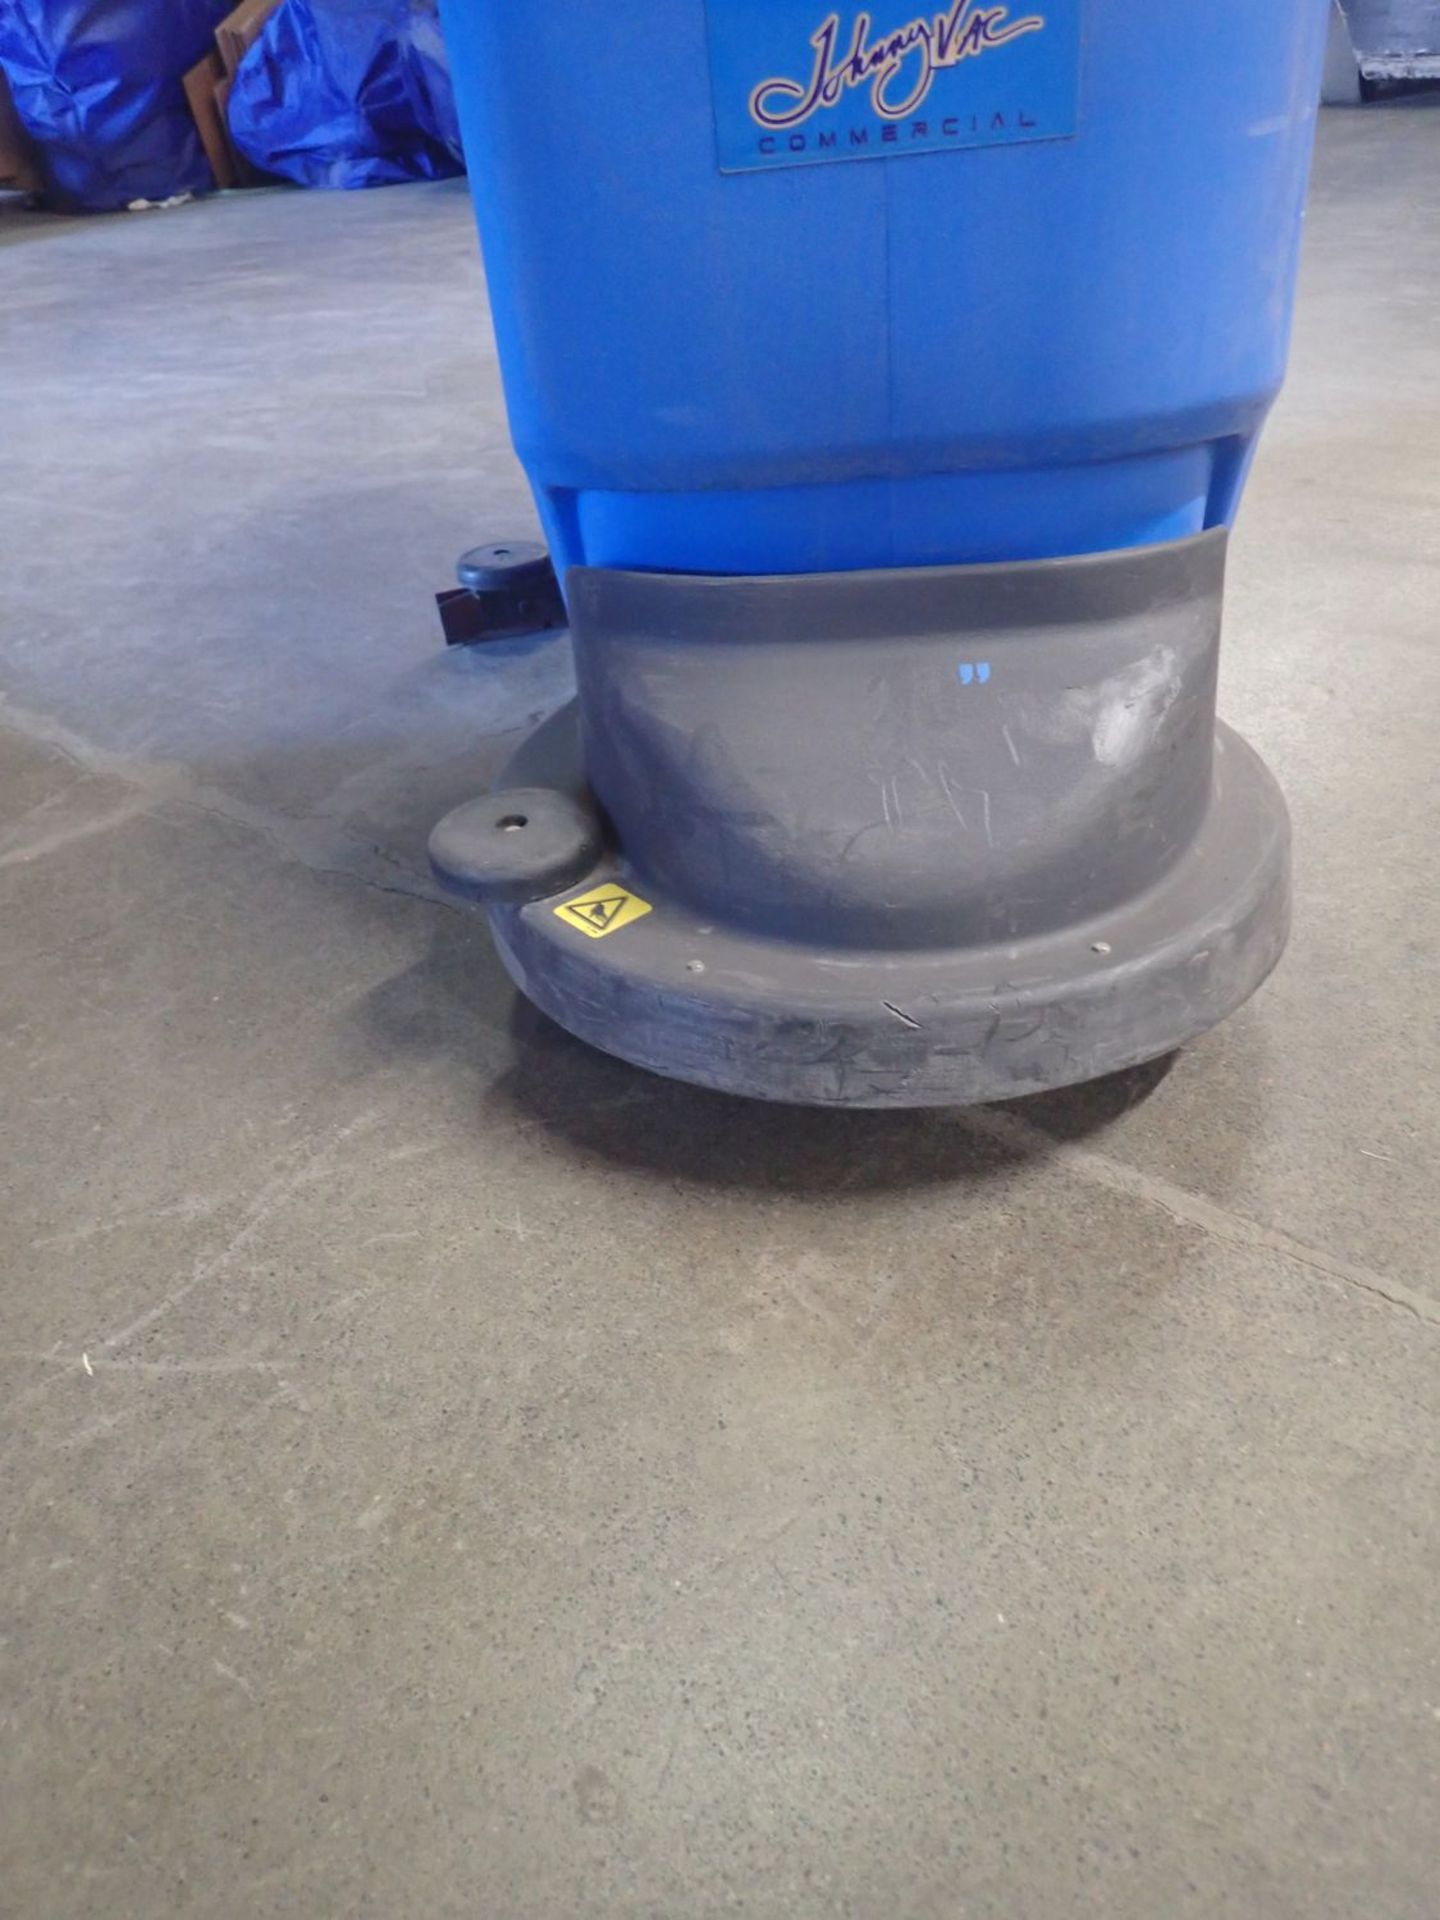 JOHNNY VAC JVC50BC 20" COMMERCIAL FLOOR CLEANER (NEEDS BATTERIES) - Image 3 of 6